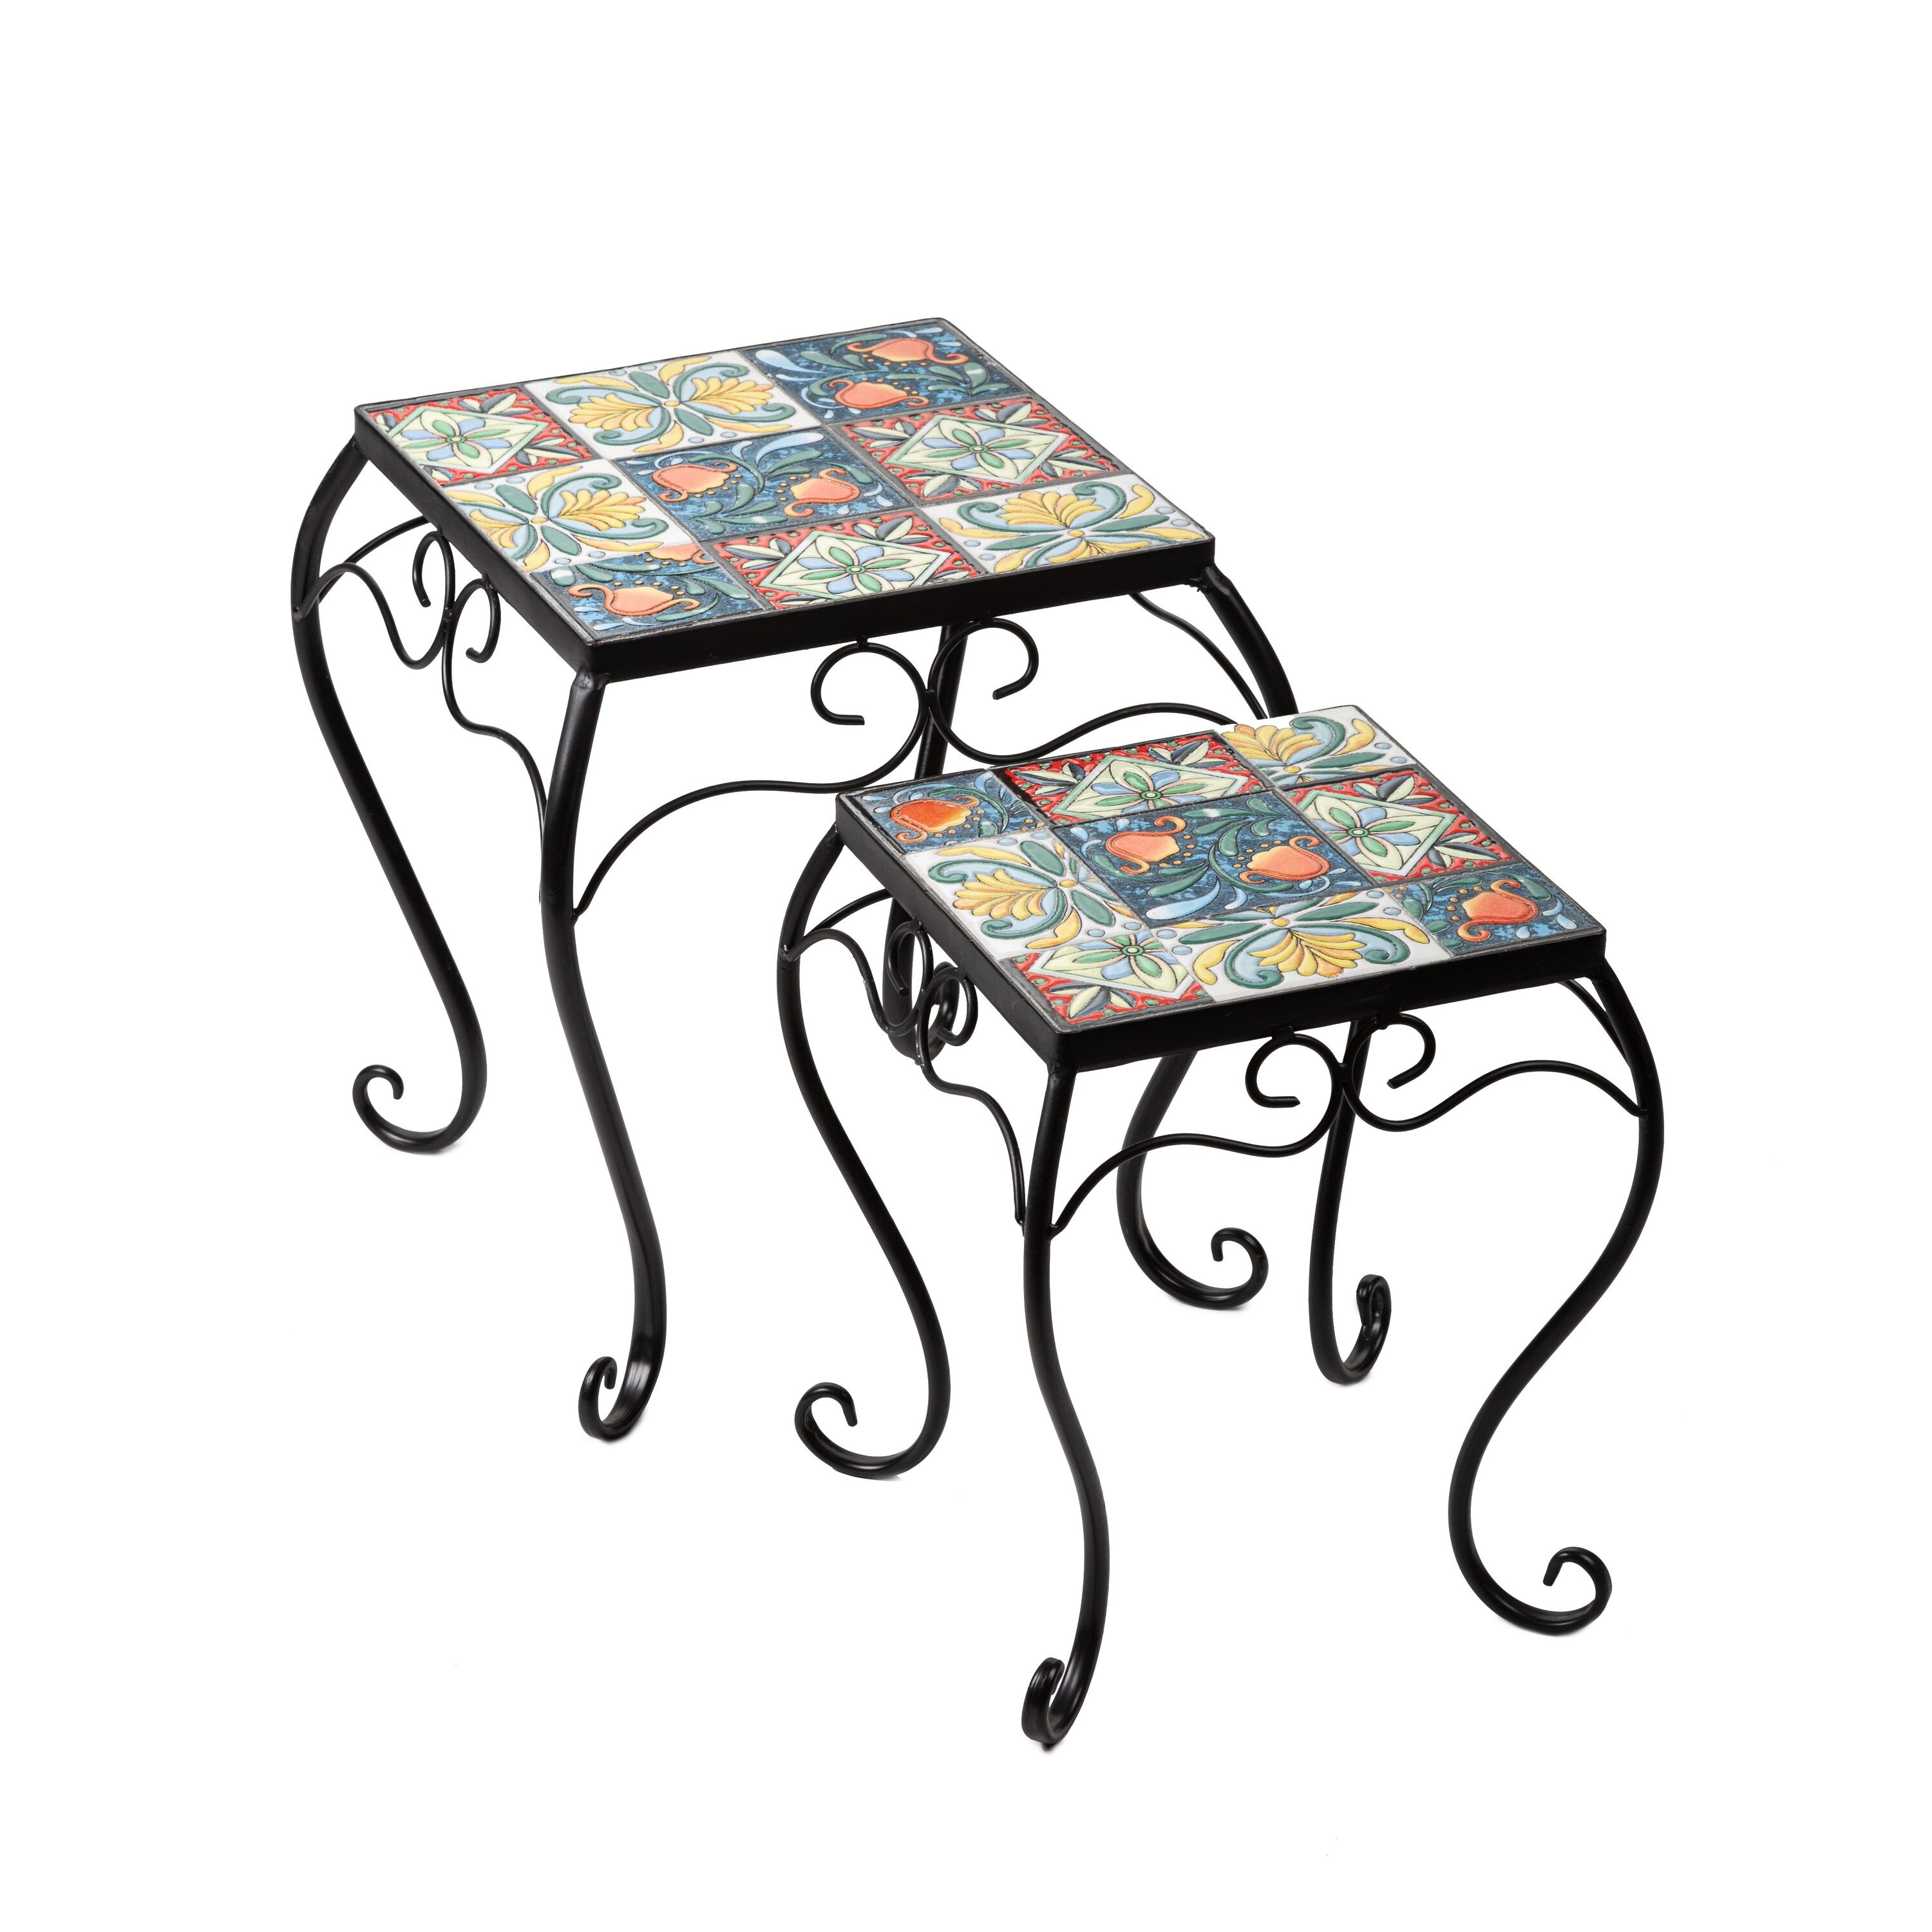 OUTDOOR AND INDOOR CERAMIC TOP TABLE WITH METAL LEGS 